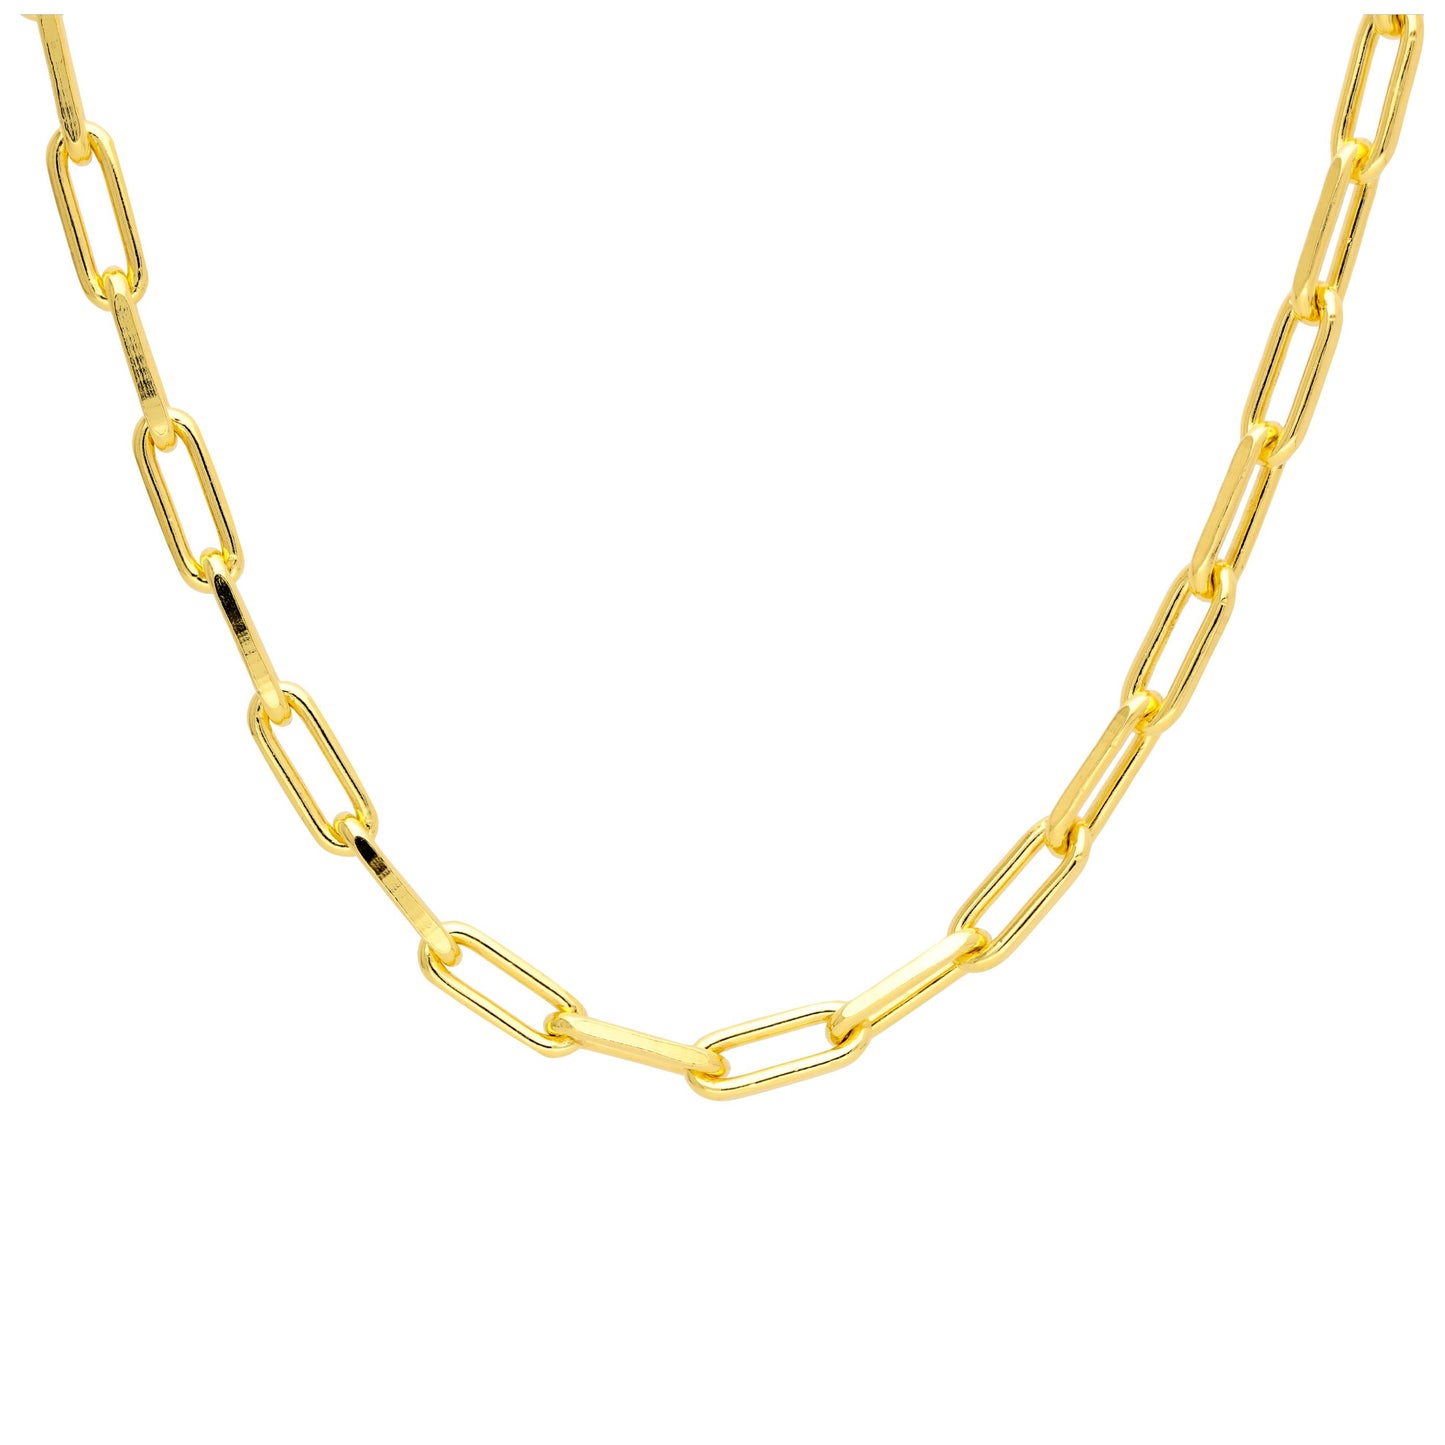 Gold Plated Sterling Silver Long Link Choker Necklace 14-16"